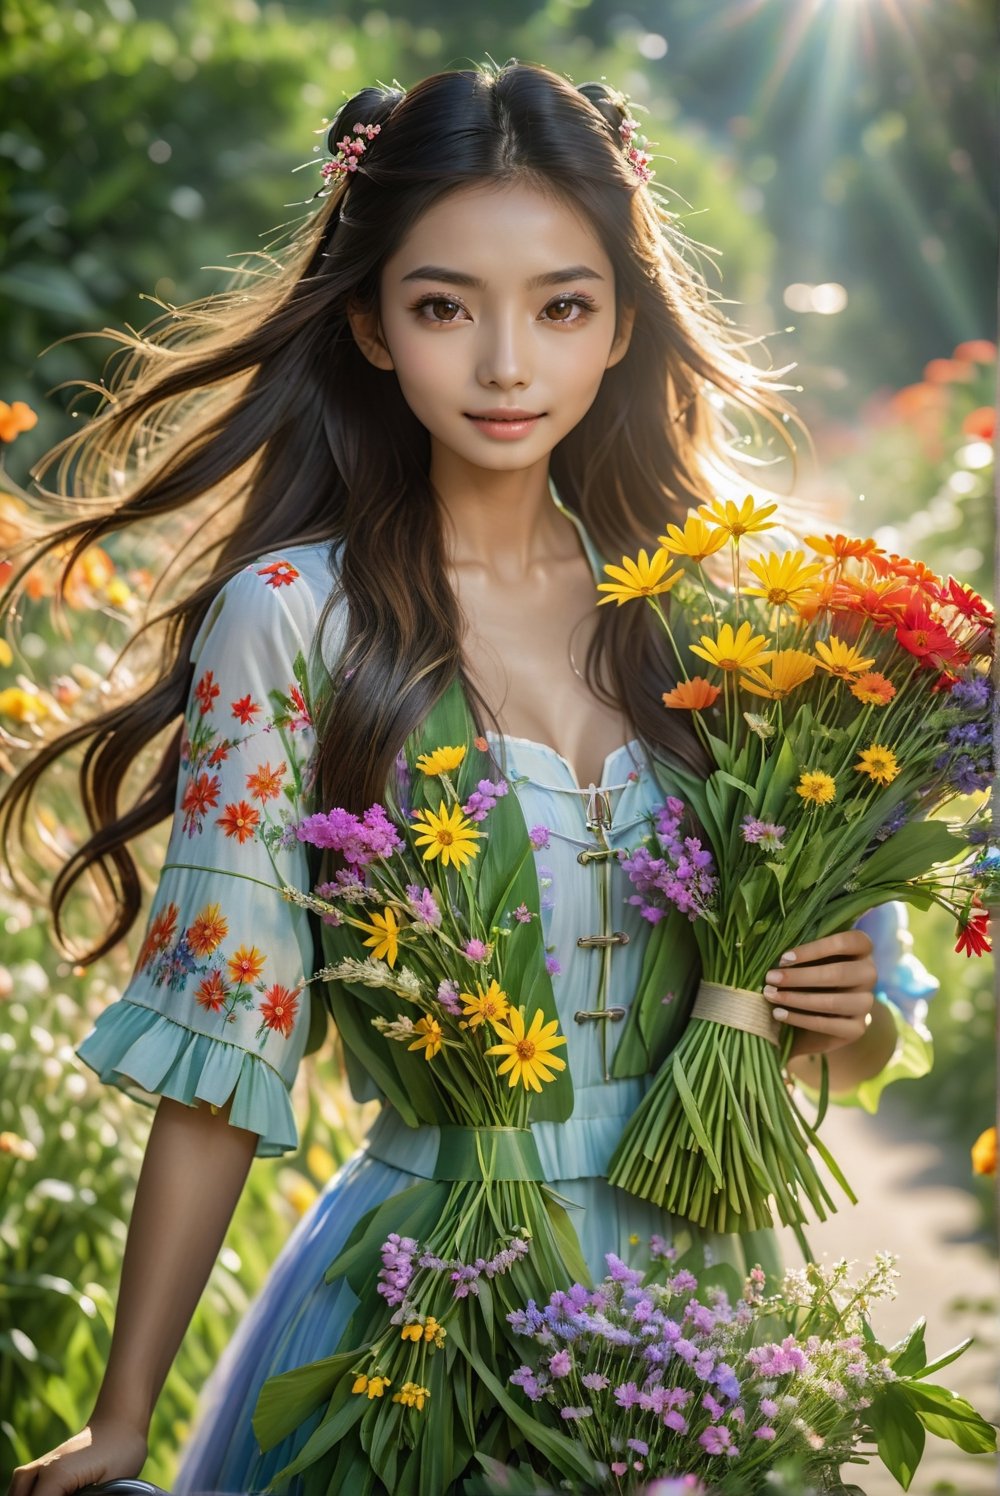 a beautiful girl, Angelababy, on a bicycle carries an armful of bright wildflowers, long wavy hair, sun, summer, rays of light, greenery, focus on girl, 15mm, f/215mm, f/2.8, 1/500s, iso2000, high detail, sharp contours, professional photo, 16k. Angelababy